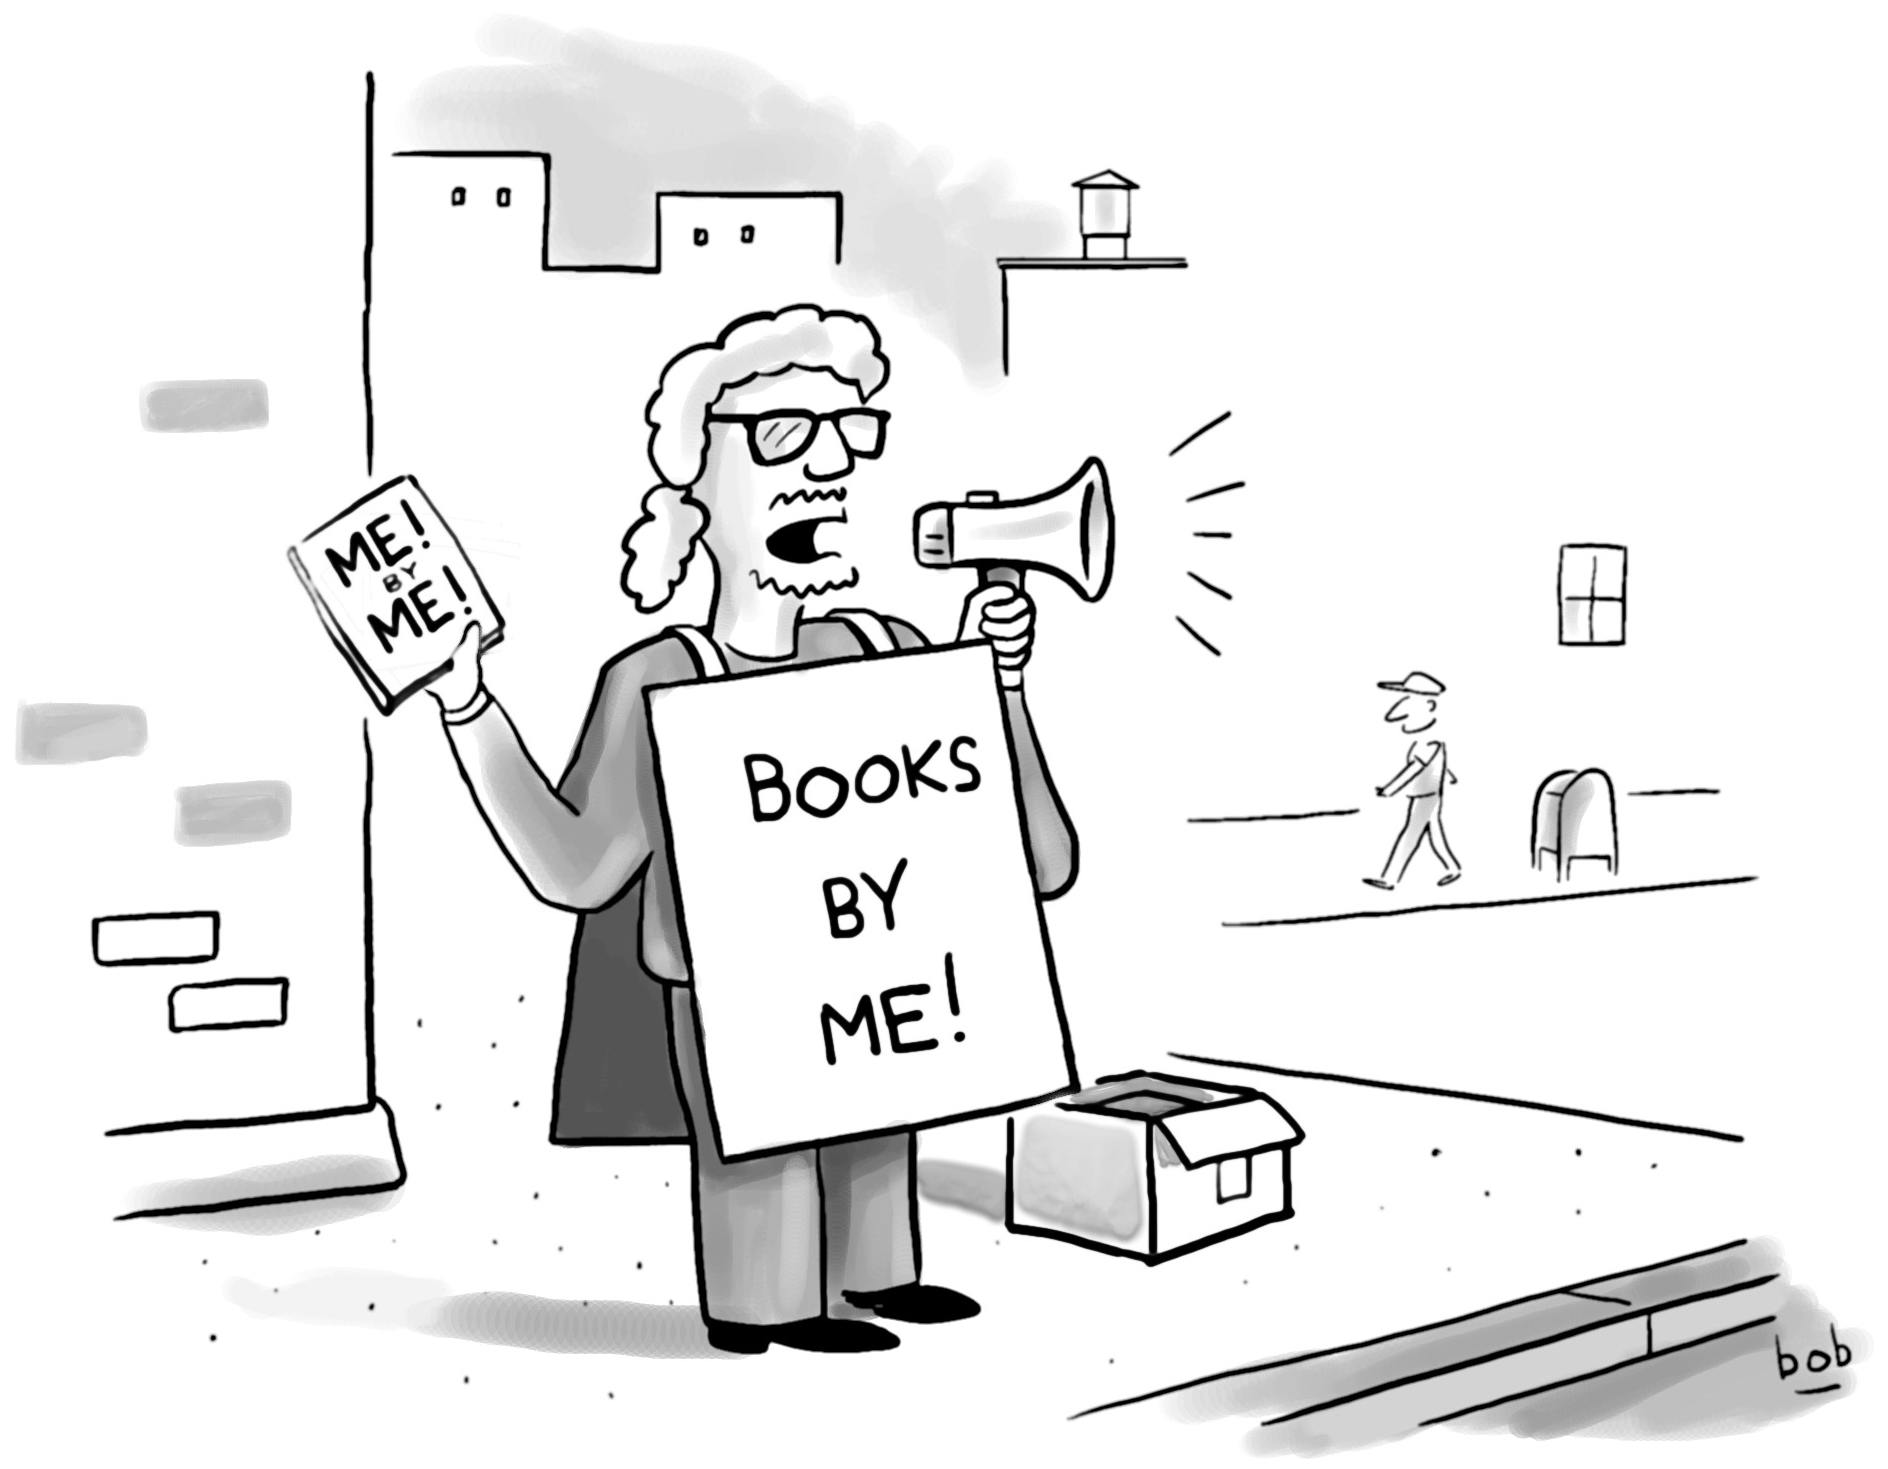 Cartoon: On an urban street corner, an author wearing a sandwich-board reading "Books by Me!" holds a book titled "Me! By Me!" aloft in one hand while the other hand holds a megaphone into which he is shouting.